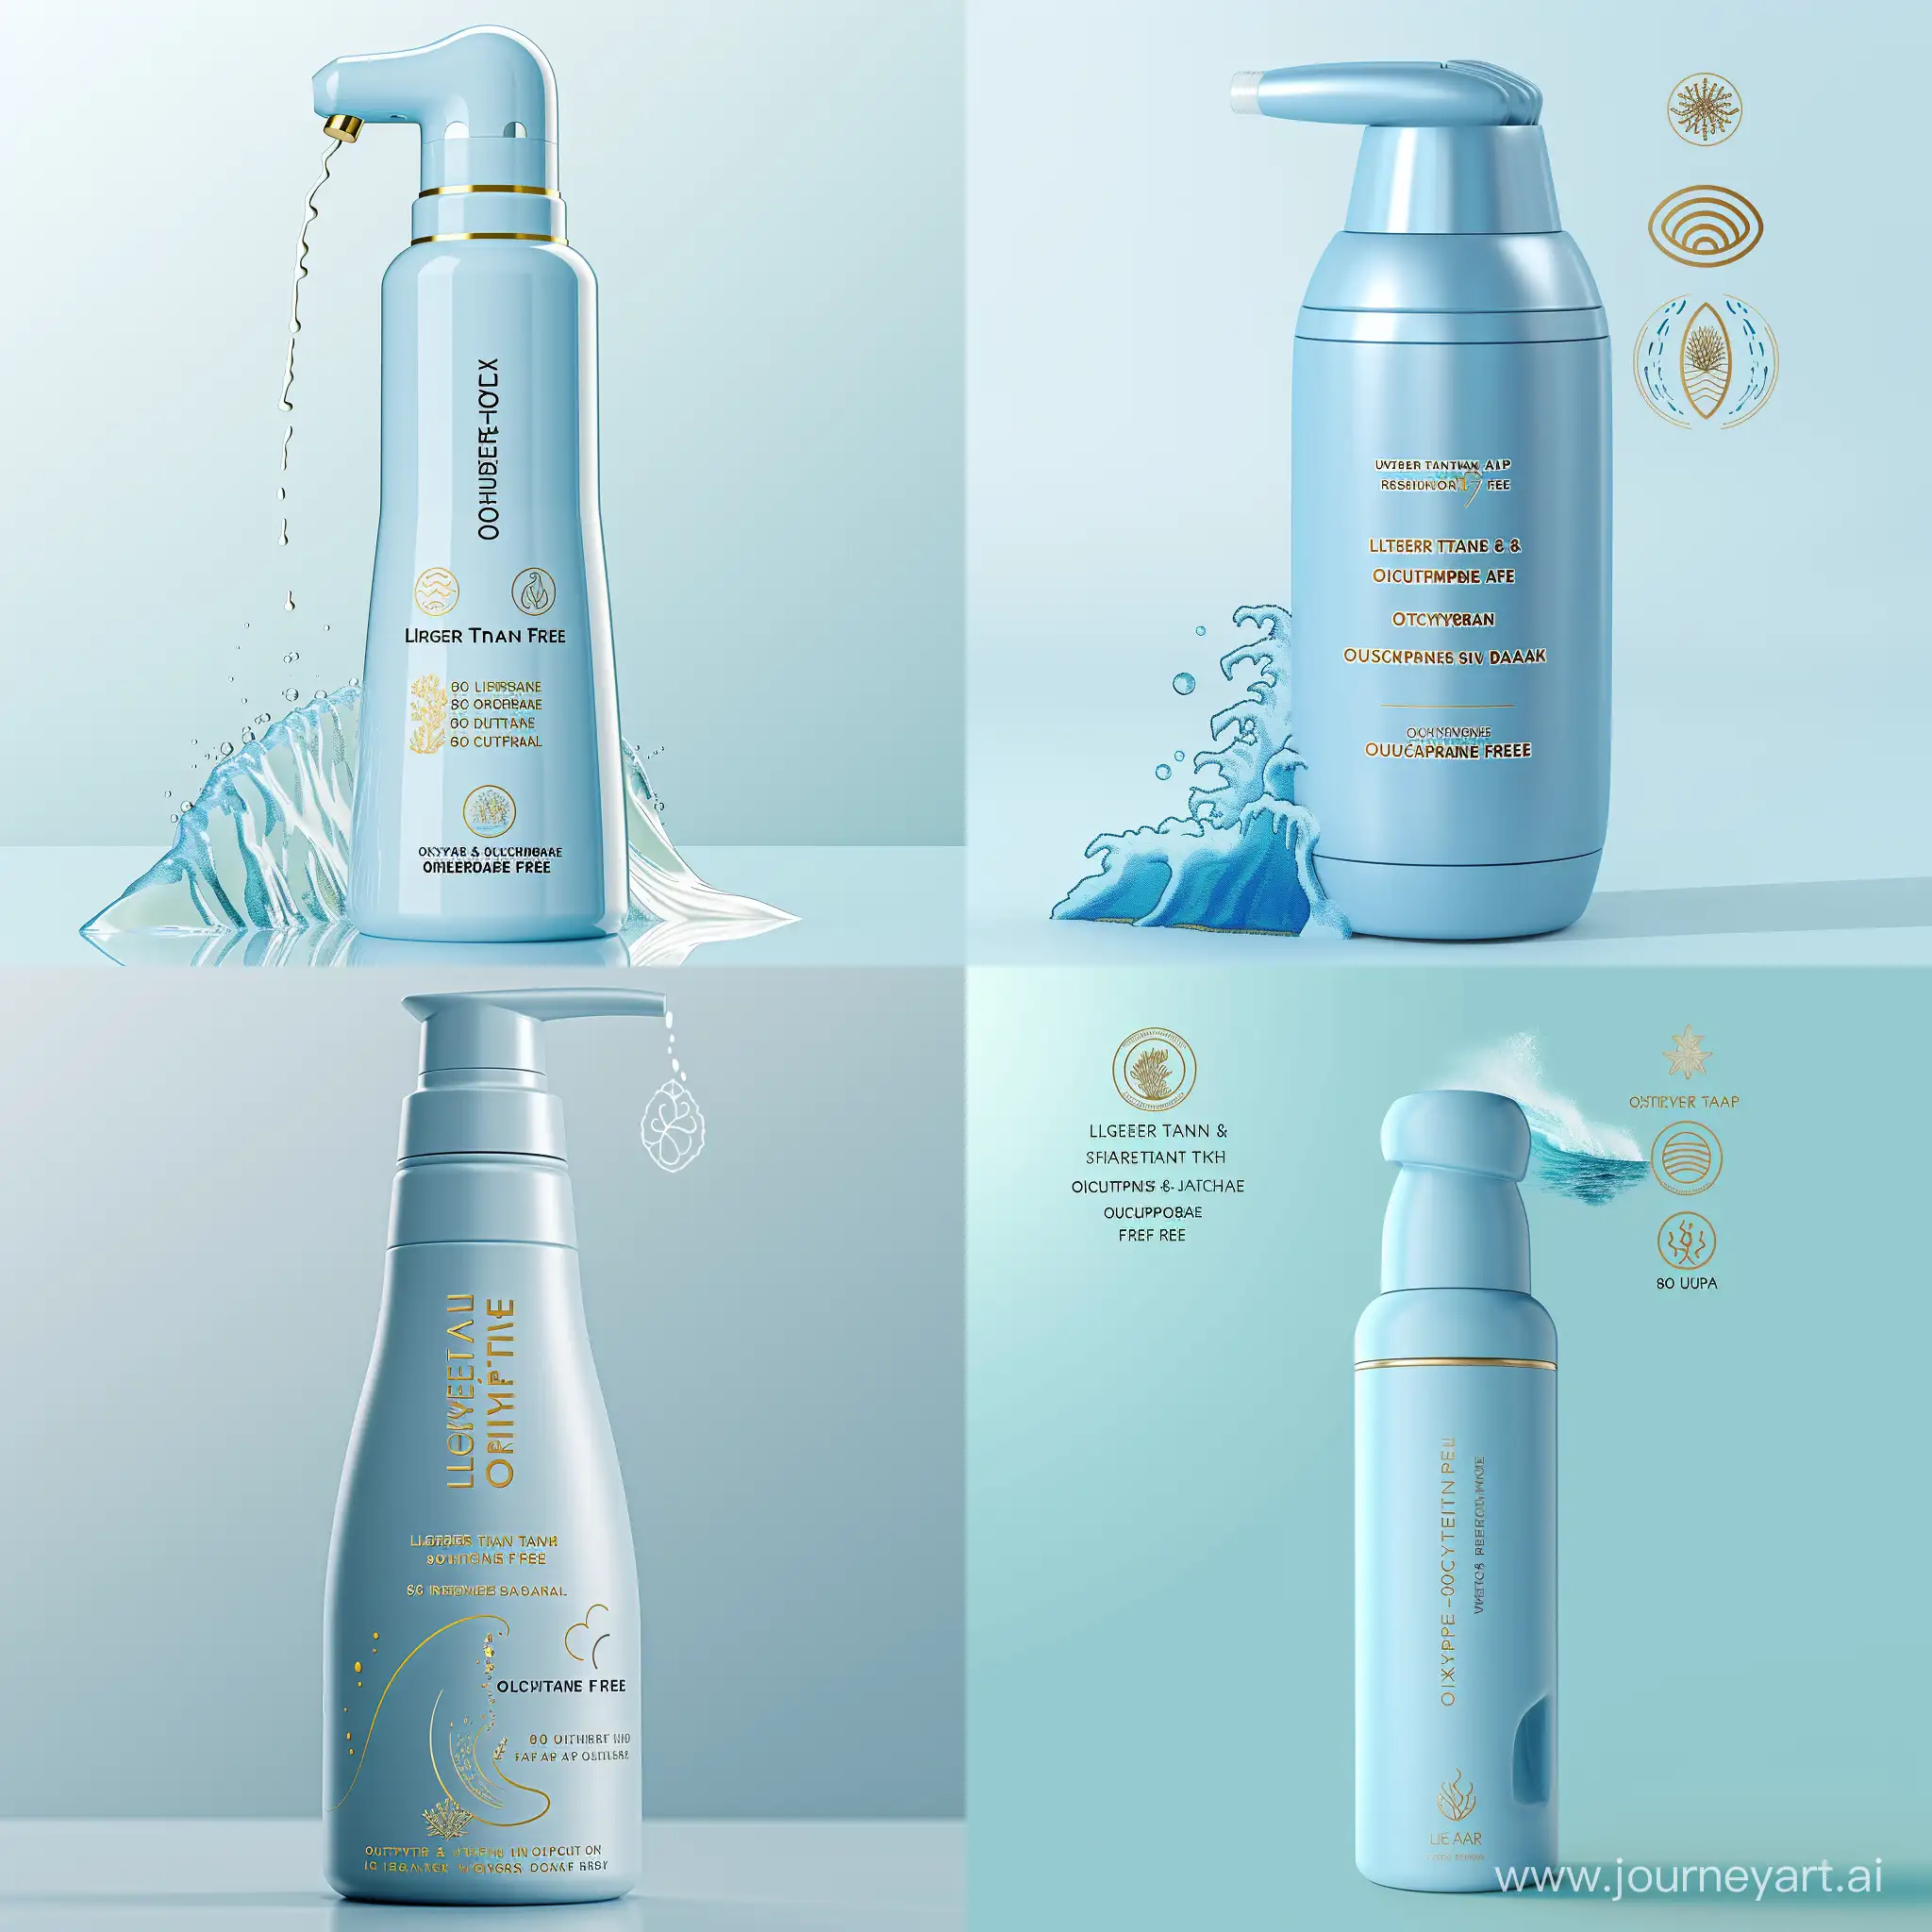 Luxury-Baby-Blue-Sunscreen-Bottle-with-EcoFriendly-Attributes